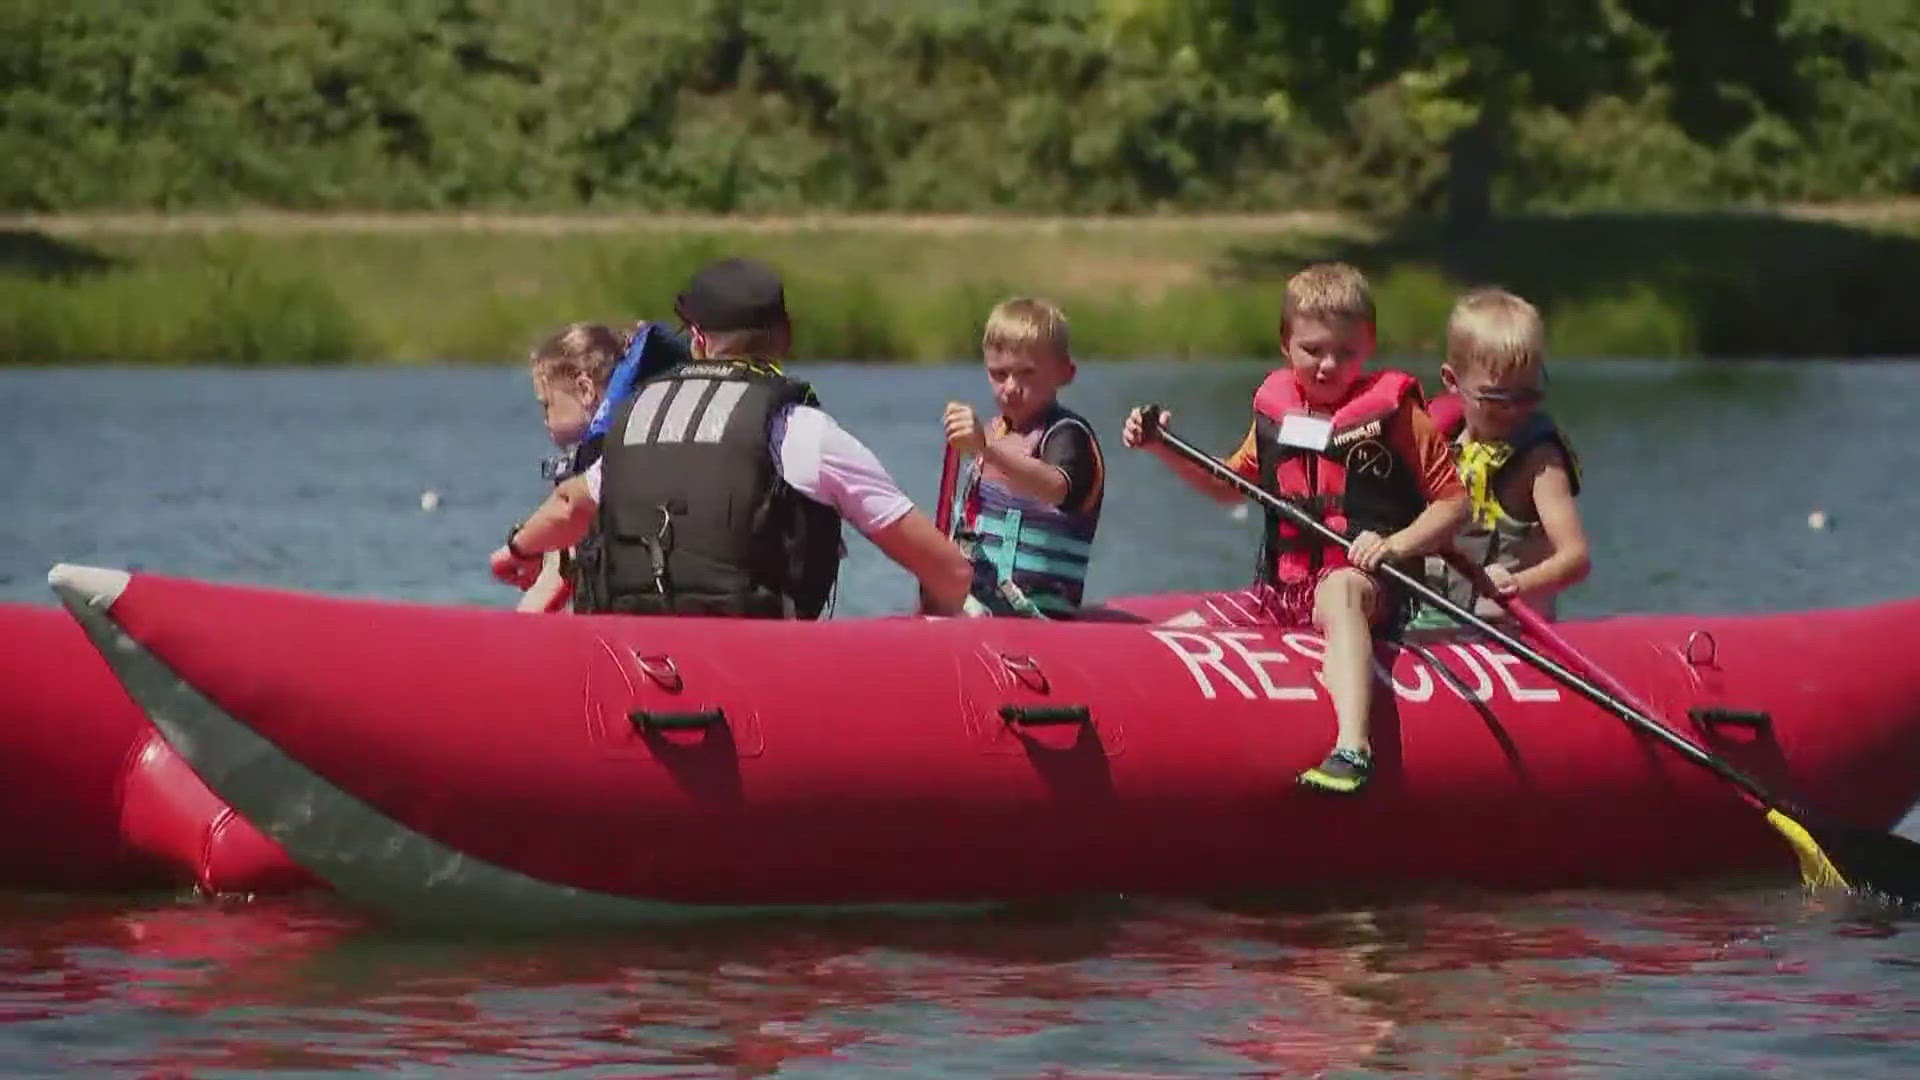 This year's water safety camp coincides with a heat wave hitting Washington state.